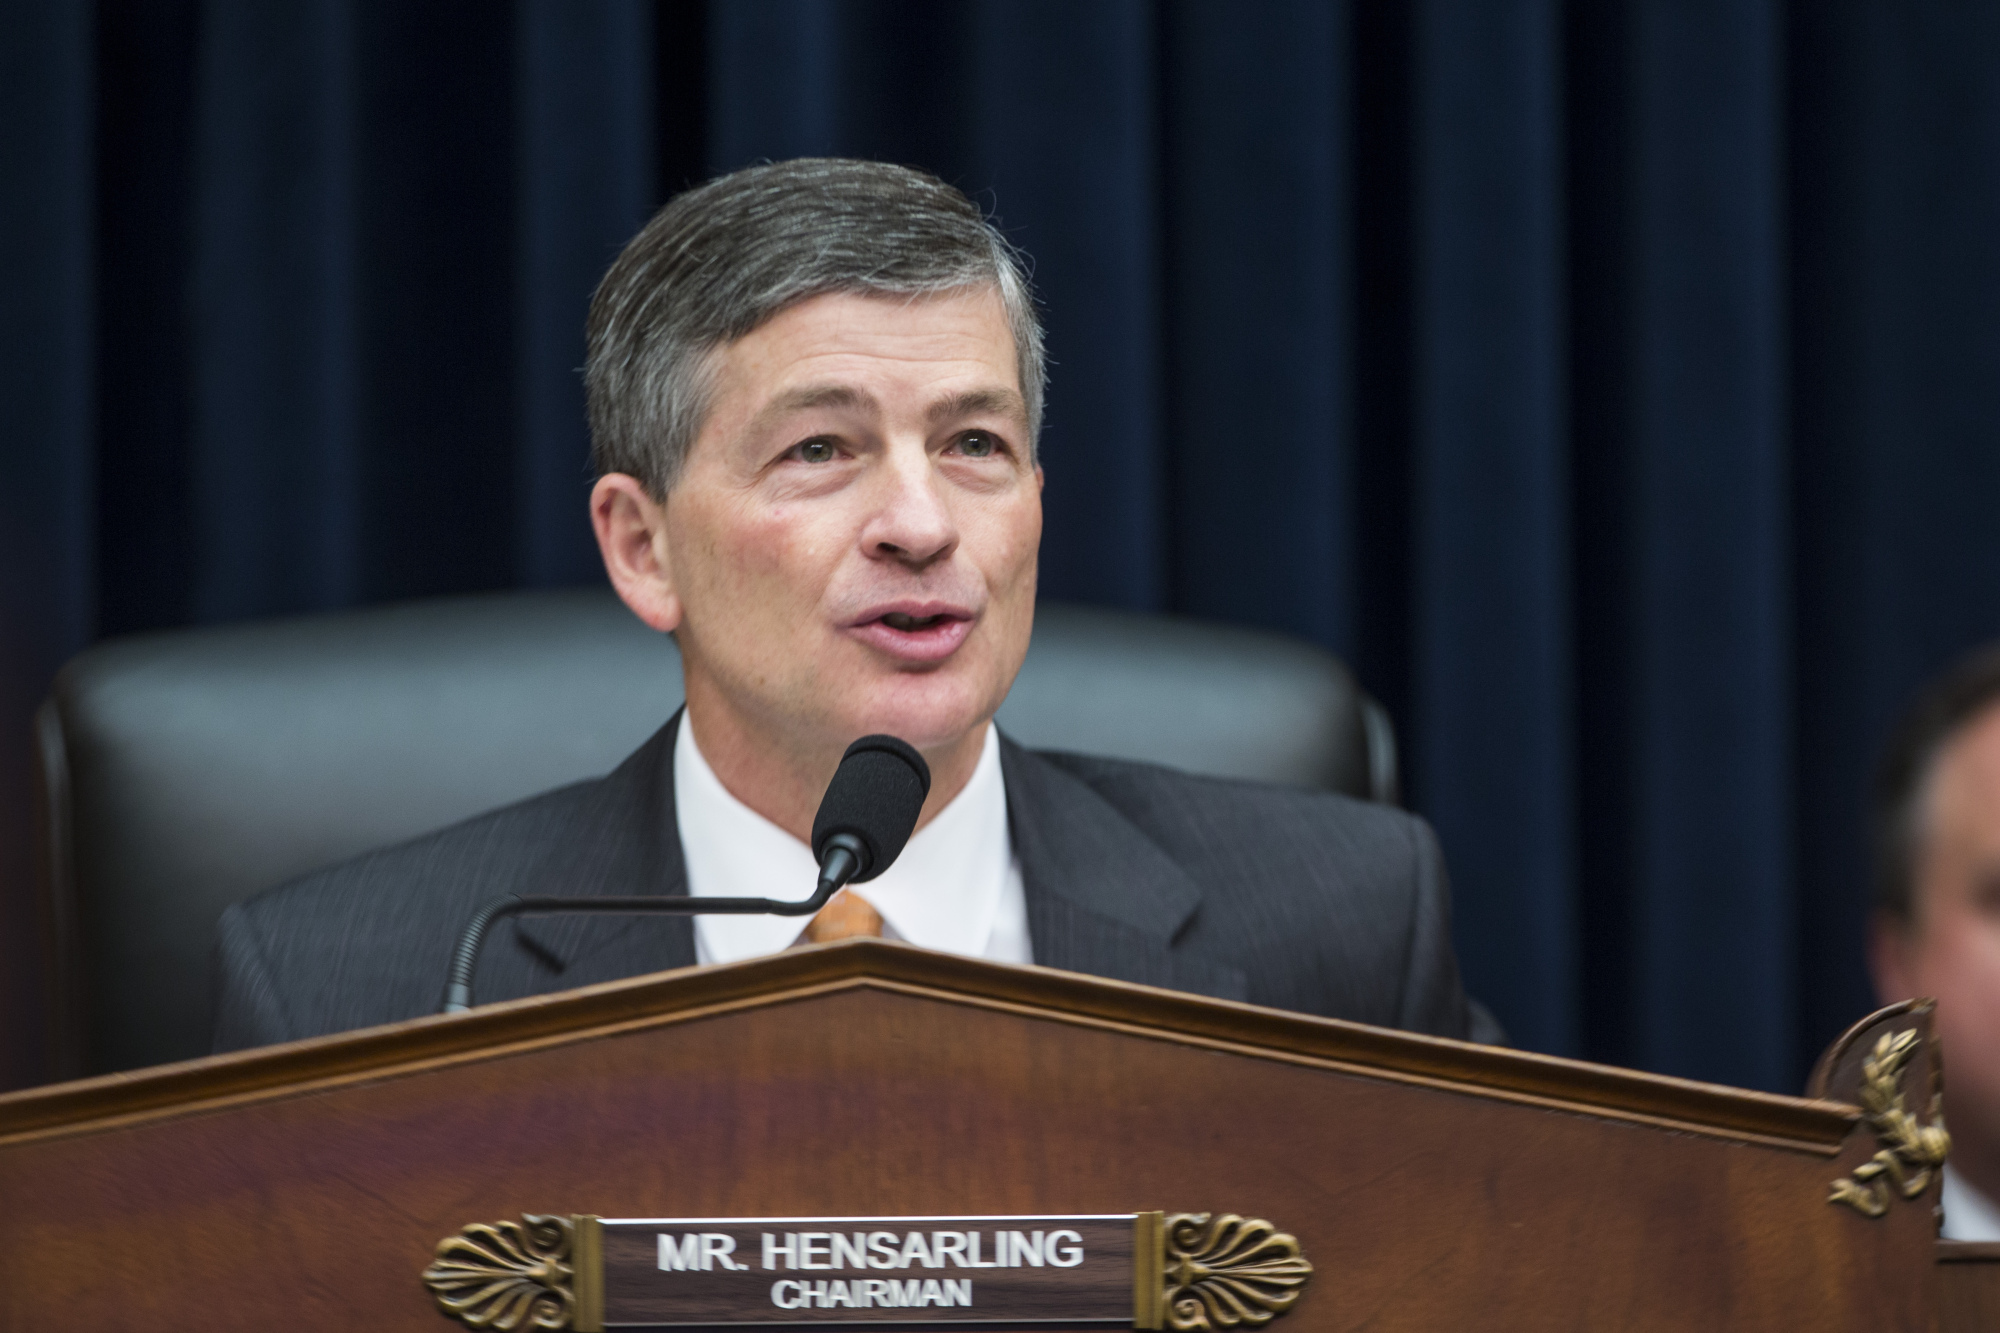 Hensarling, GOP Lawmaker Who Oversees Wall Street, to Retire - Bloomberg